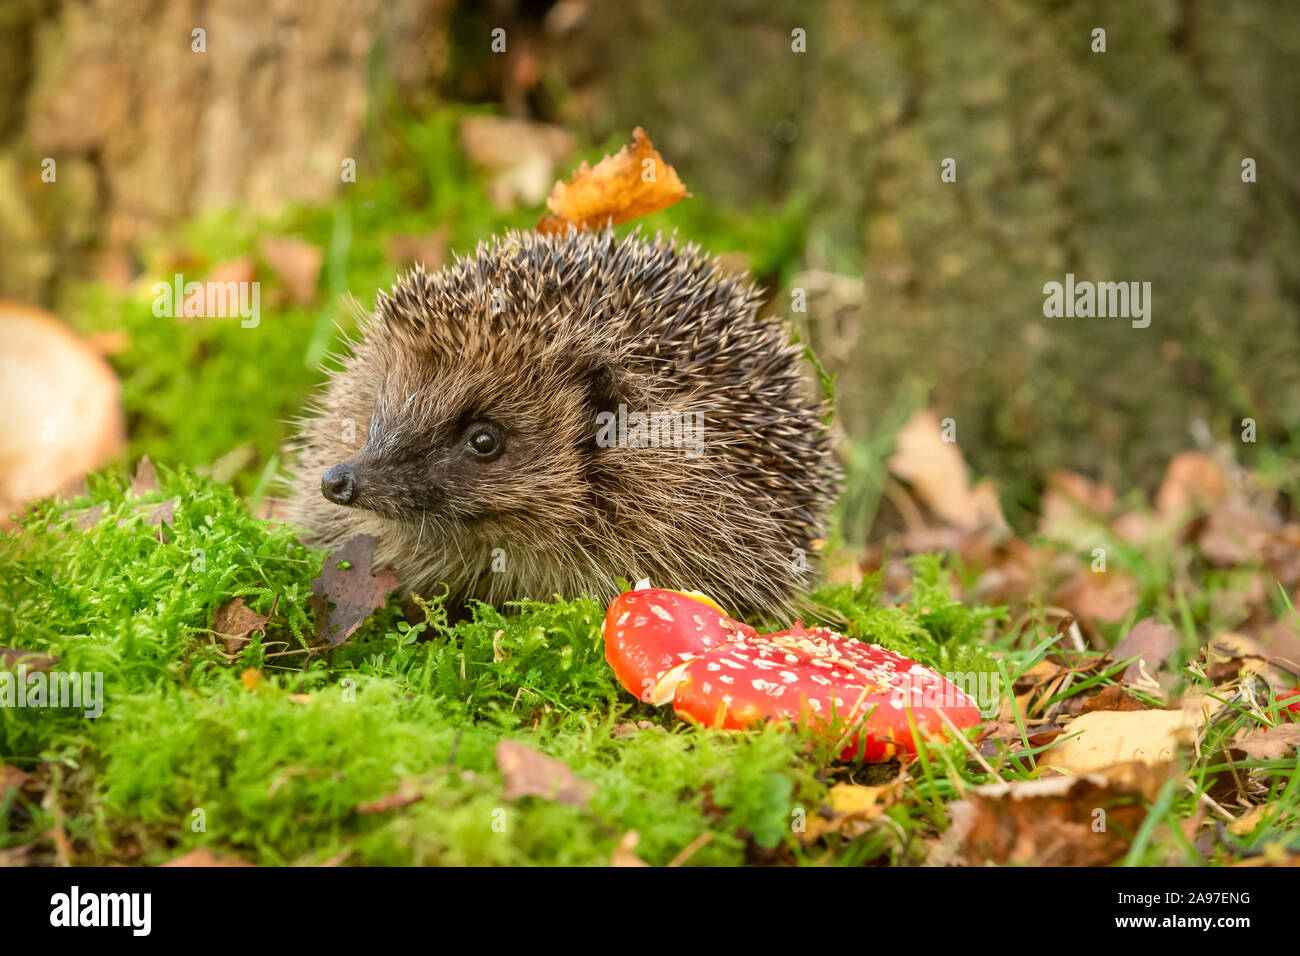 Hedgehog, (Scientific name: Erinaceus Europaeus) wild, native, European hedgehog at dusk with red Fly Agaric toadstool and green moss.  Facing left. Stock Photo